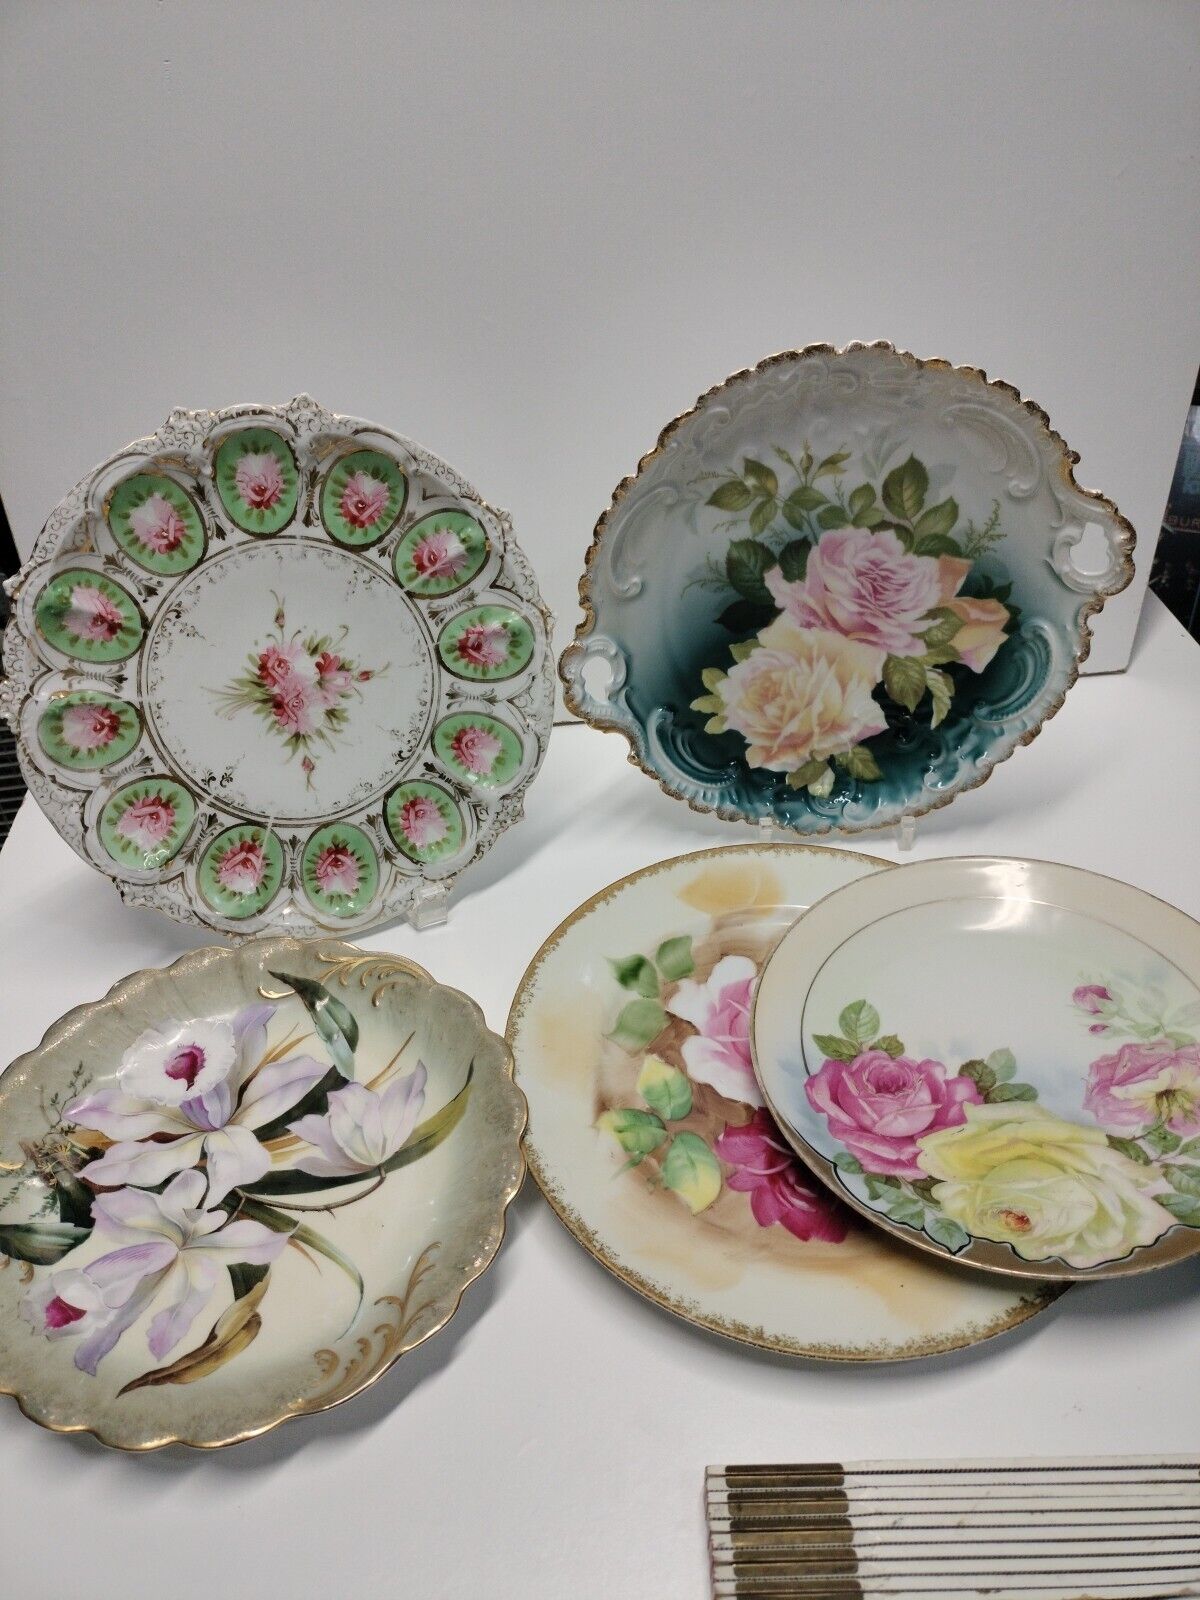 Collectors Special Antique Plates Bavaria Japan Etc. Hand Painted Lot of 5